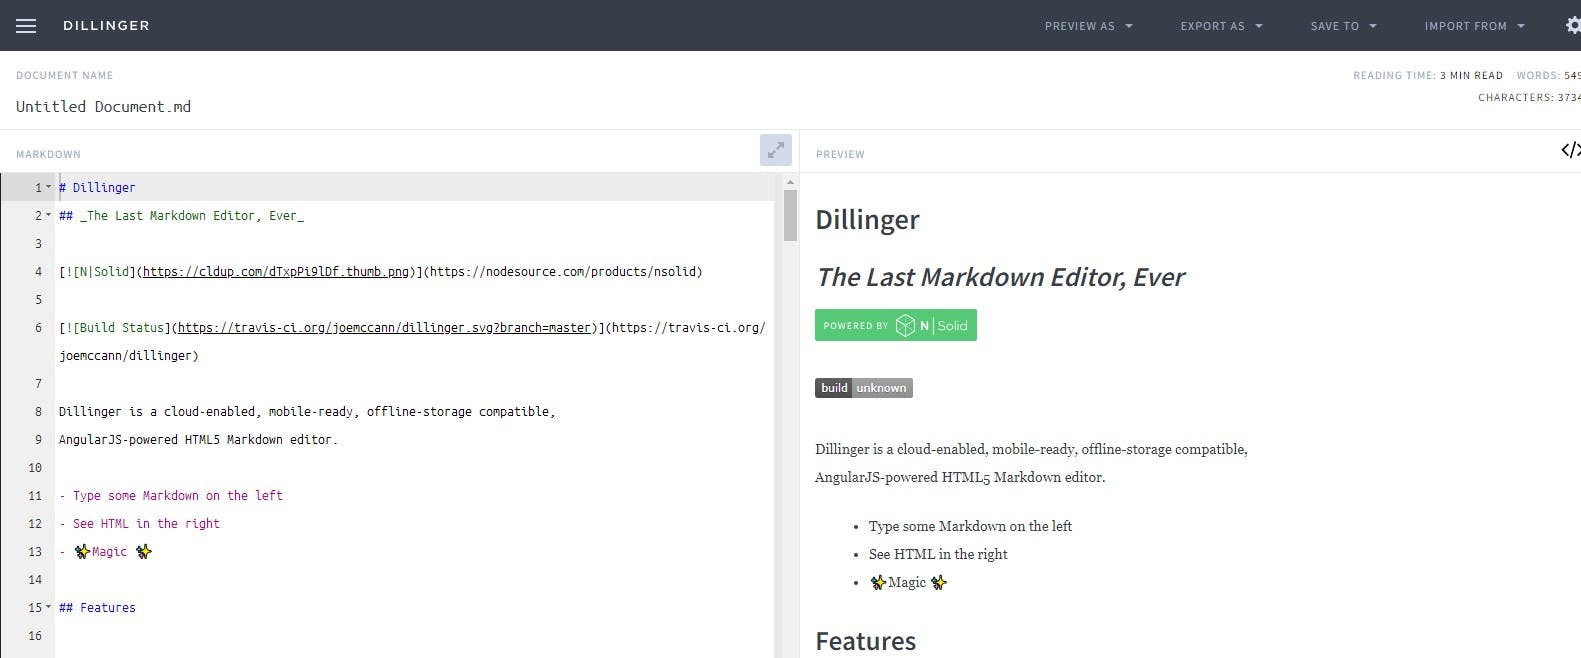 Dillinger - A user-friendly Markdown editor with real-time preview and distraction-free writing environment.